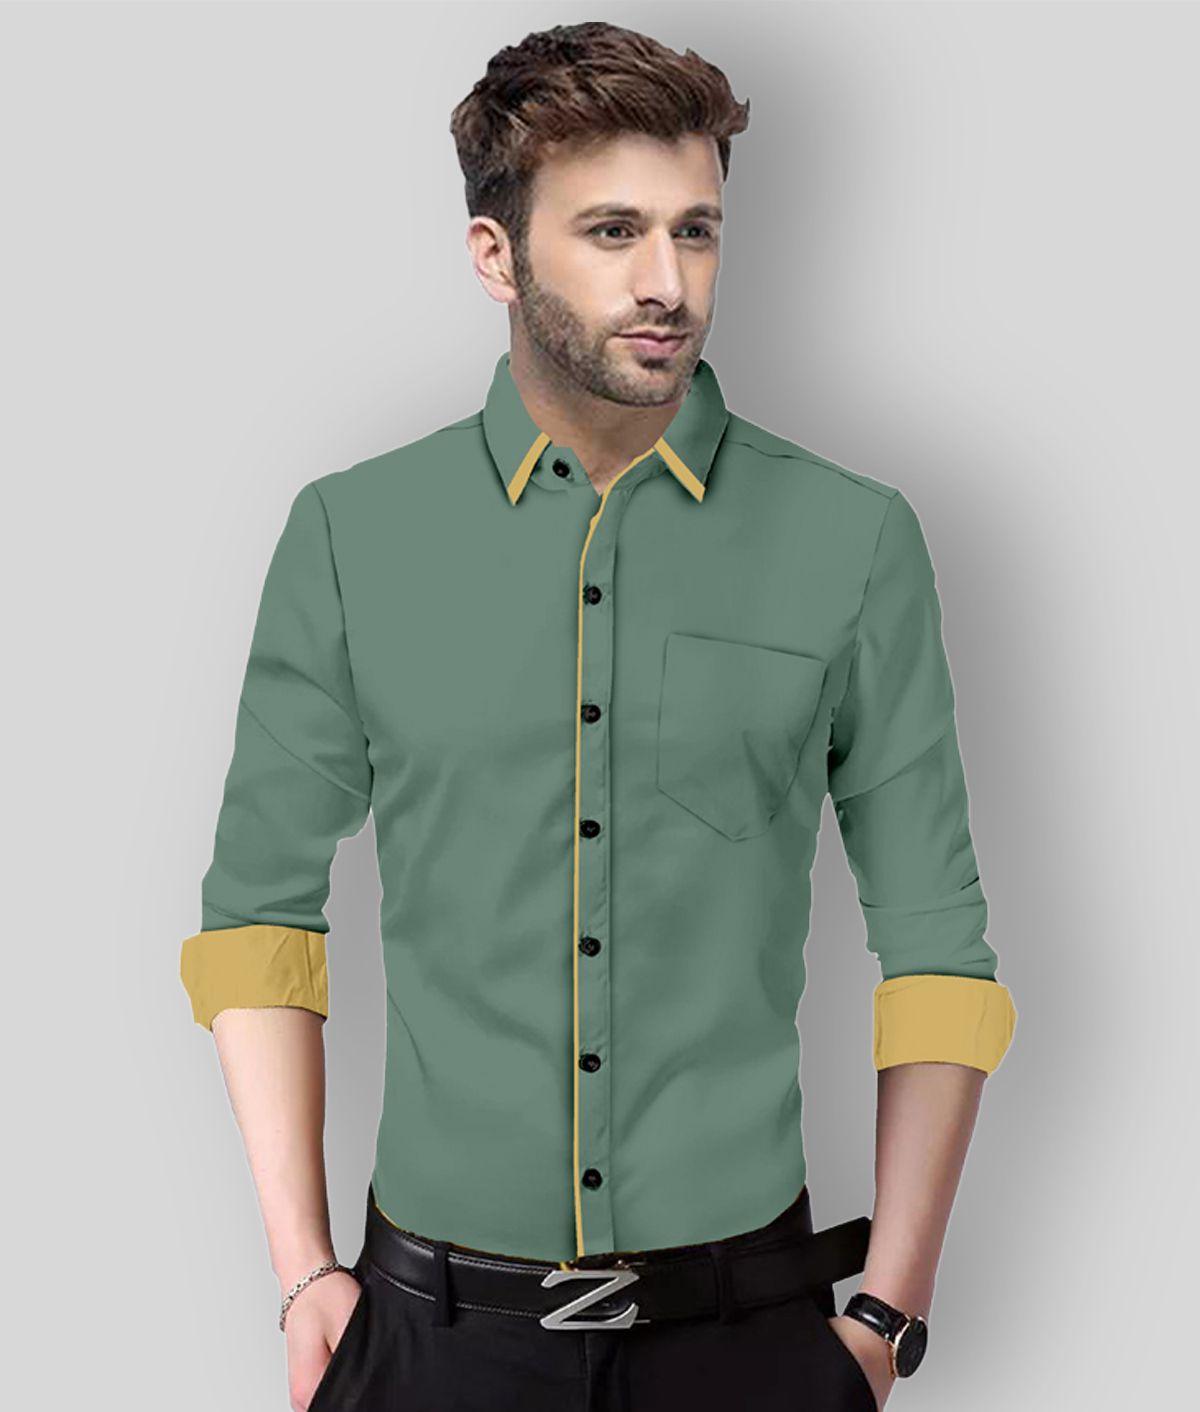     			P&V CREATIONS - Green Cotton Blend Slim Fit Men's Casual Shirt (Pack of 1)